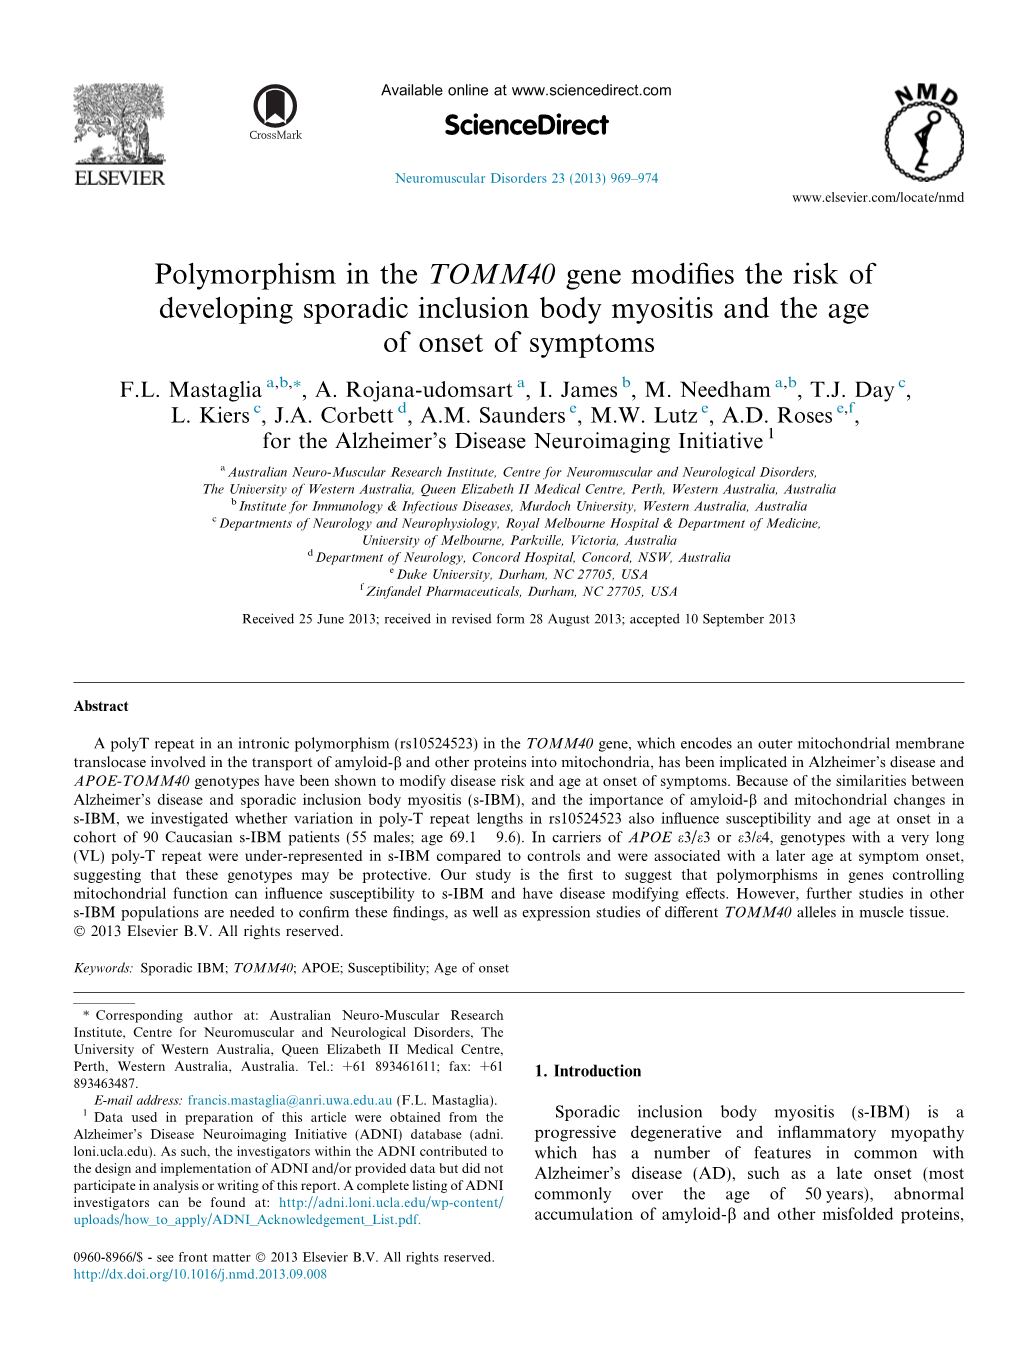 Polymorphism in the TOMM40 Gene Modifies the Risk of Developing